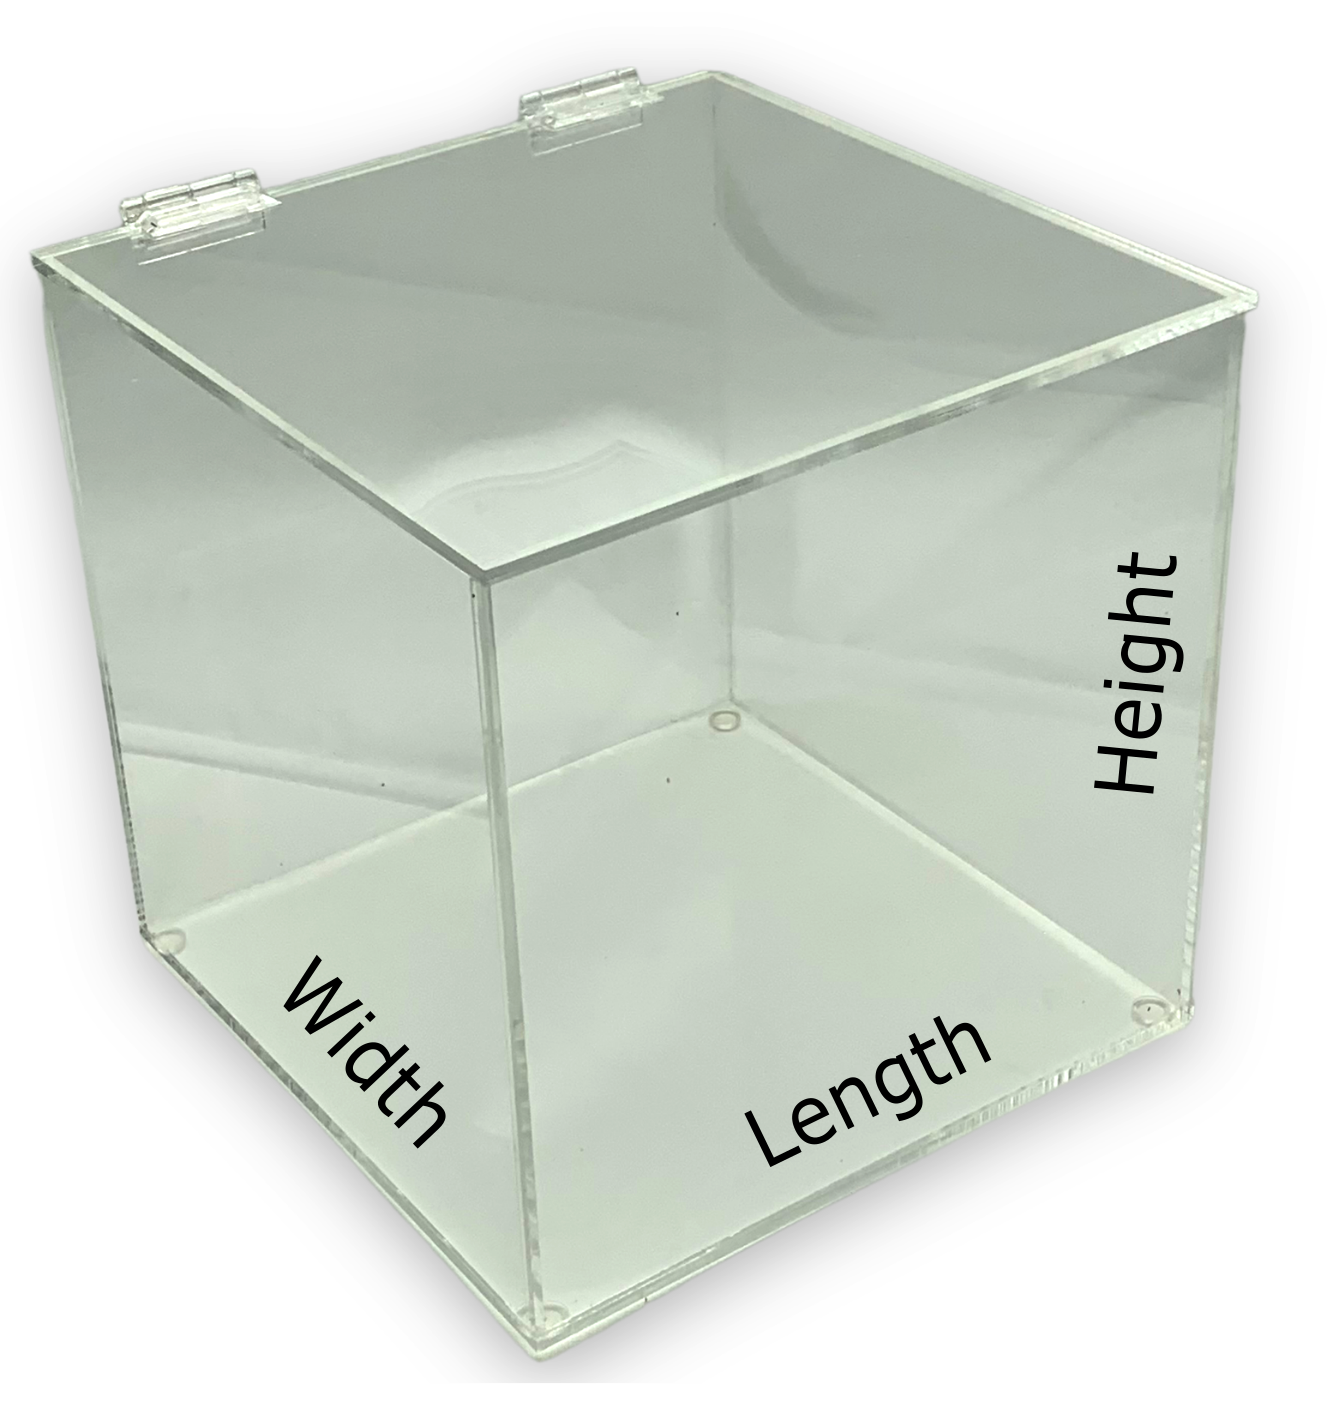 Plexiglass Lucite Box With Hinged Top Lid - Custom Size